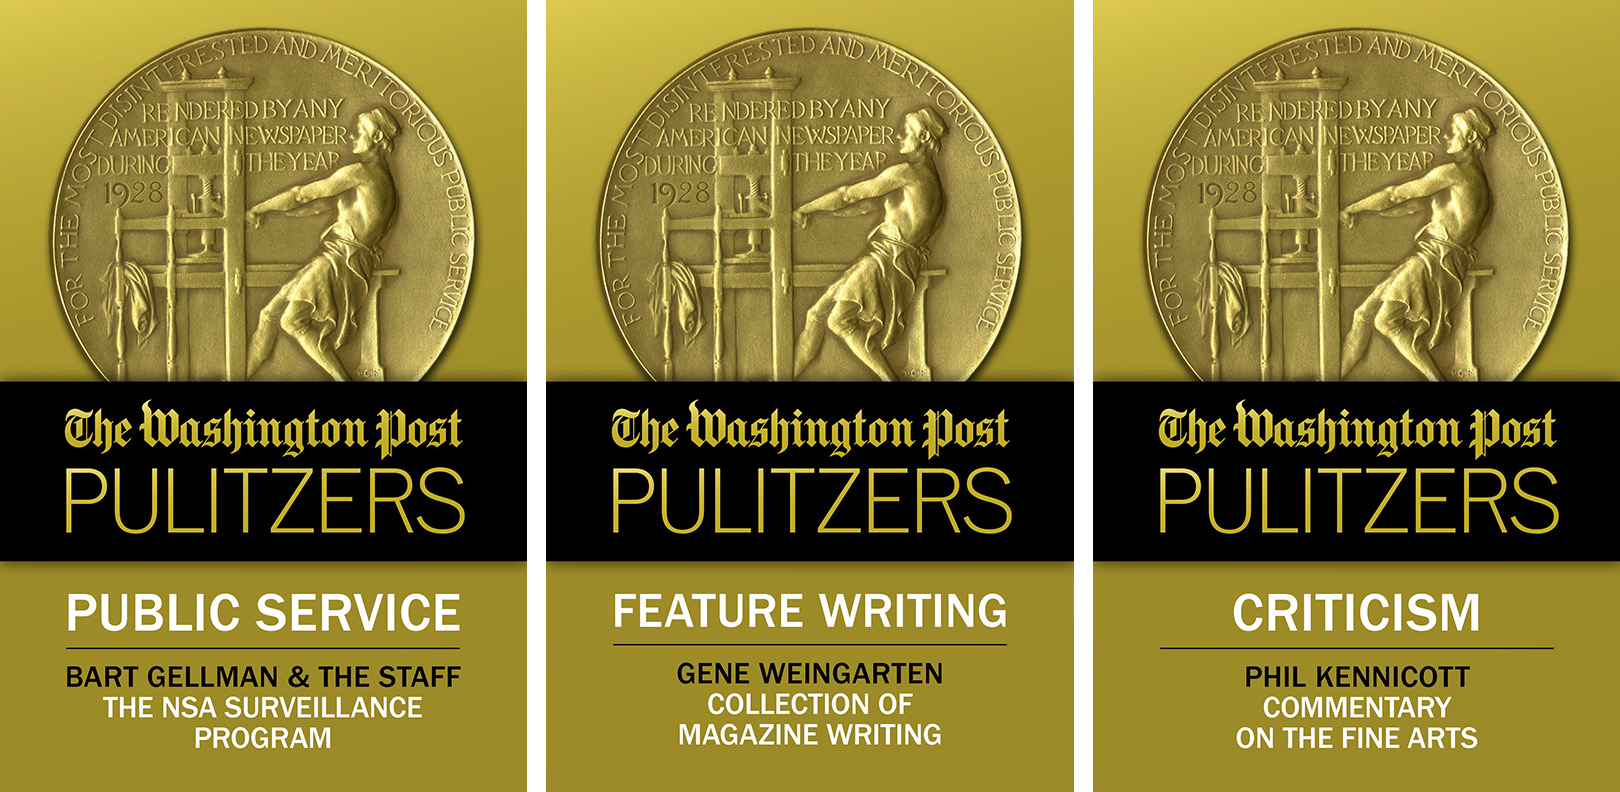 TWP epub cover-Pulitzer Series_combined-1.jpg